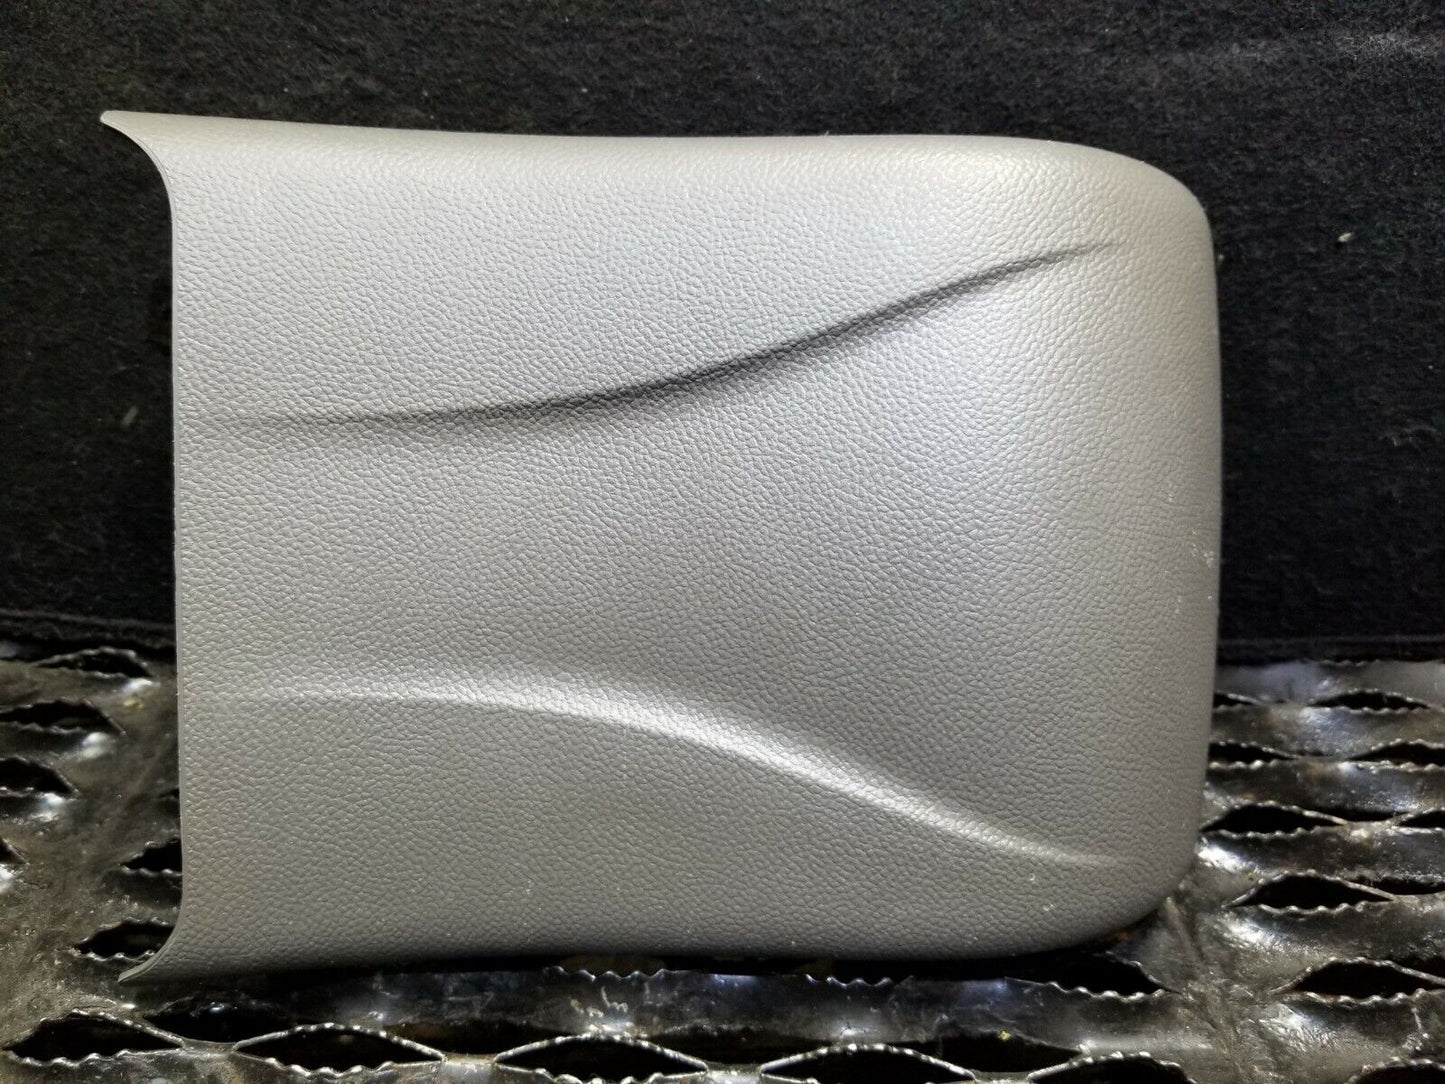 10 11 12 13 Infiniti G37 Coupe Center Console Rear Cover Panel OEM 99k